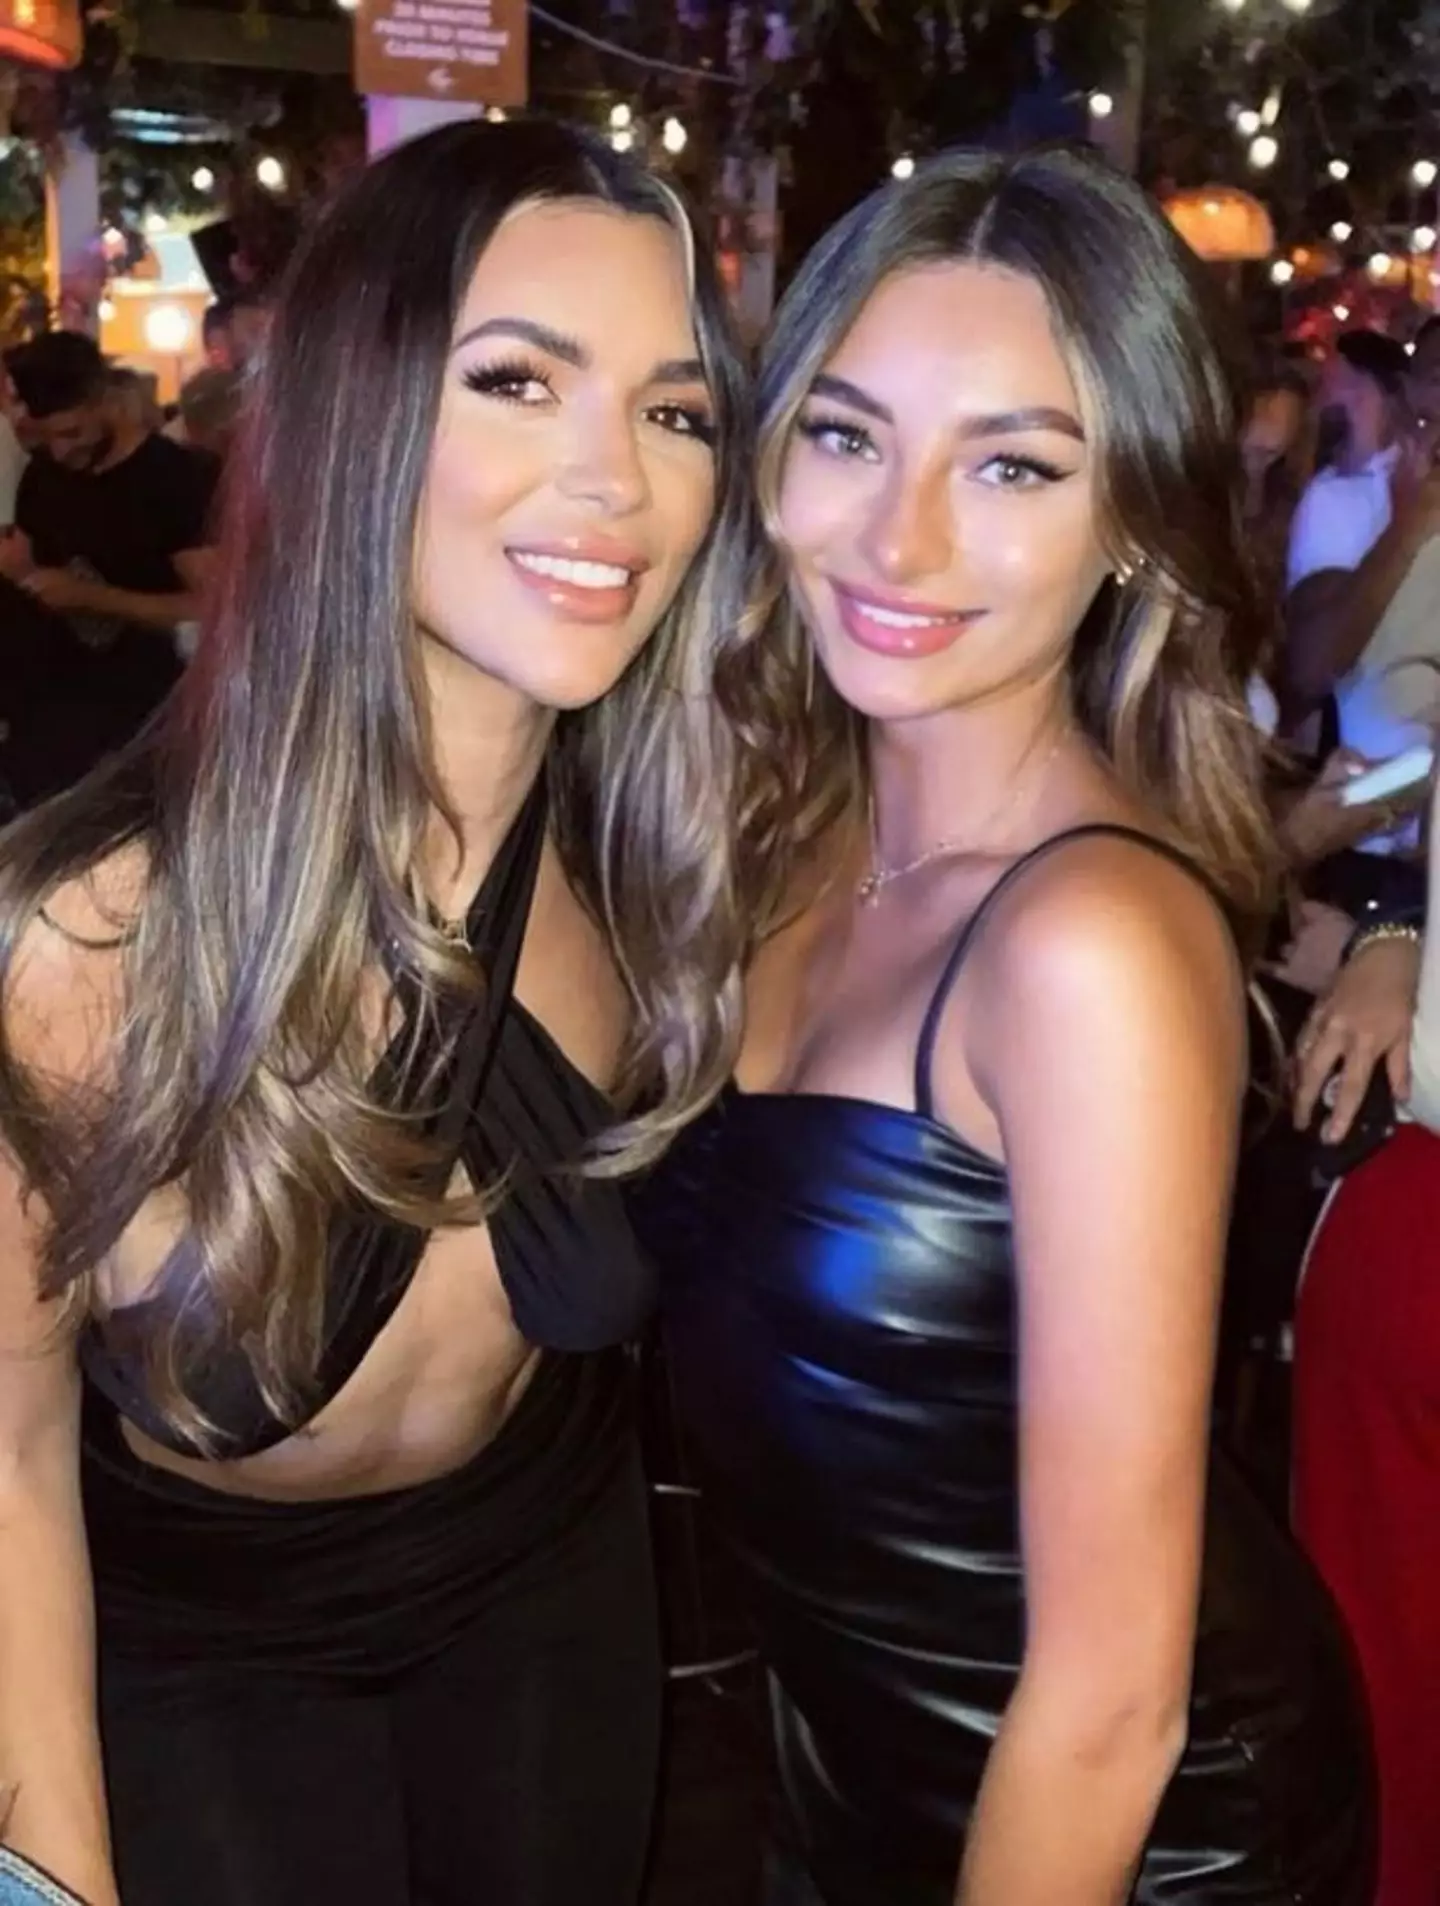 The Love Island star standing with her best friend Arabella Ovenden.